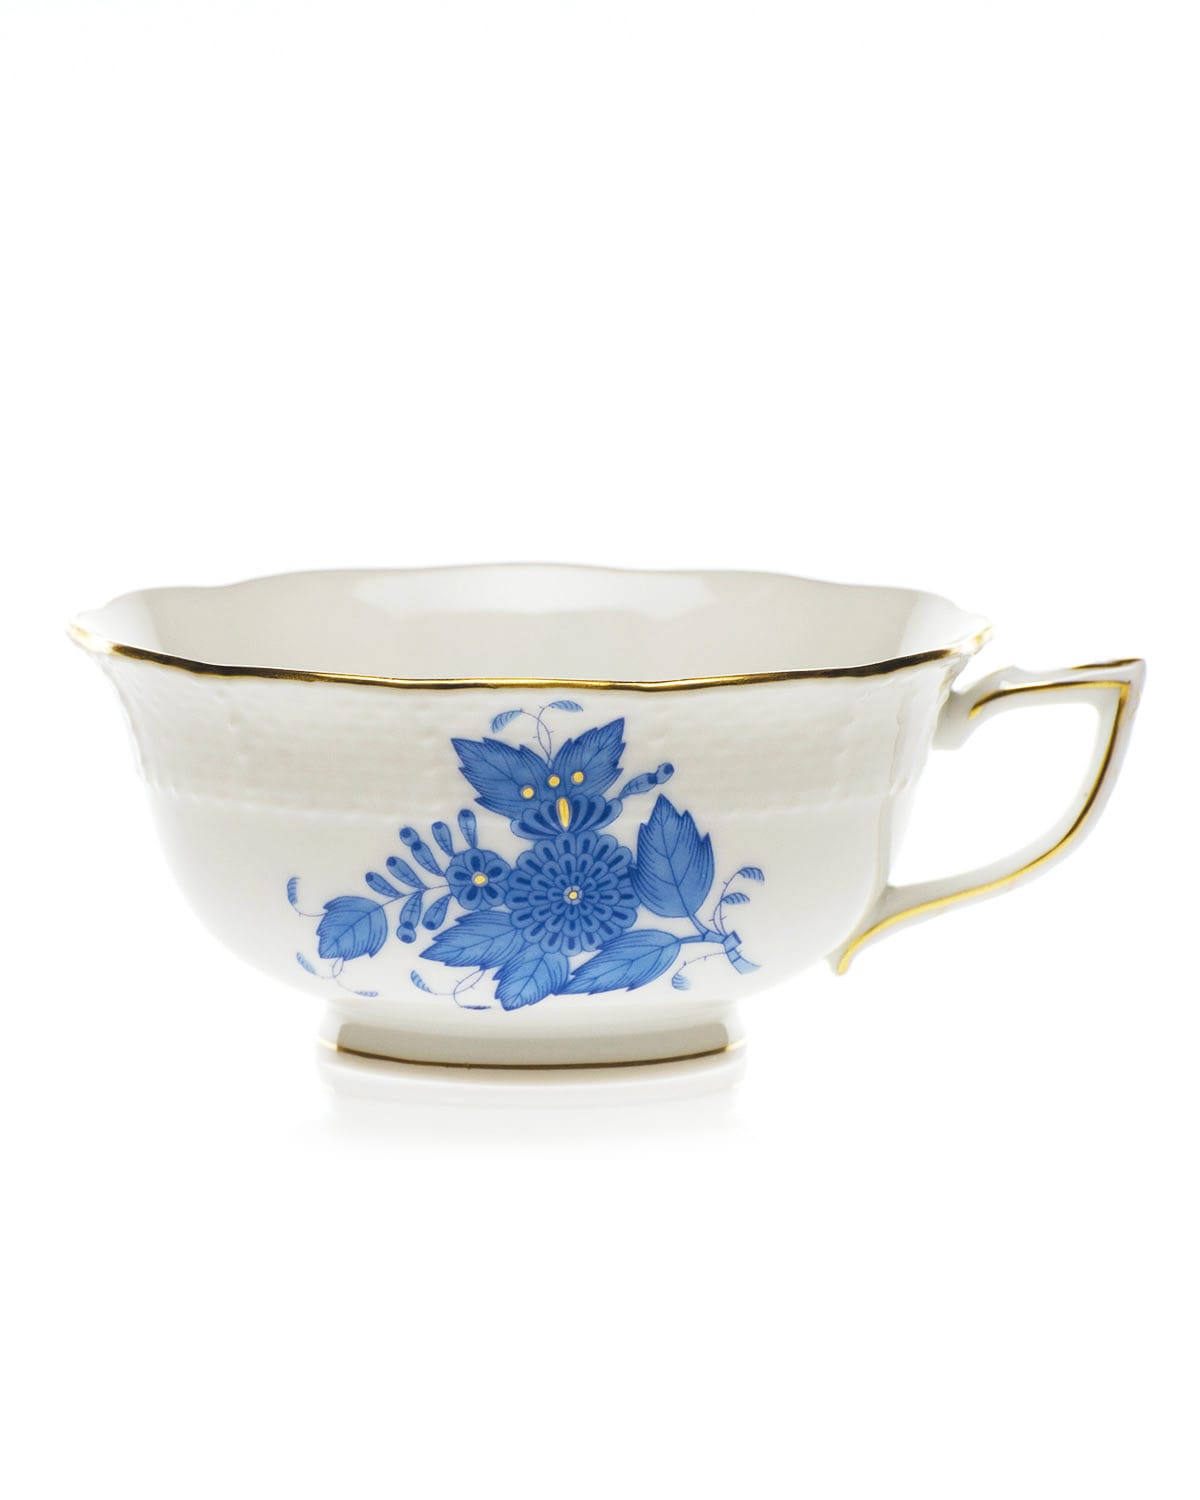 HEREND BLUE CHINESE BOUQUET TEACUP